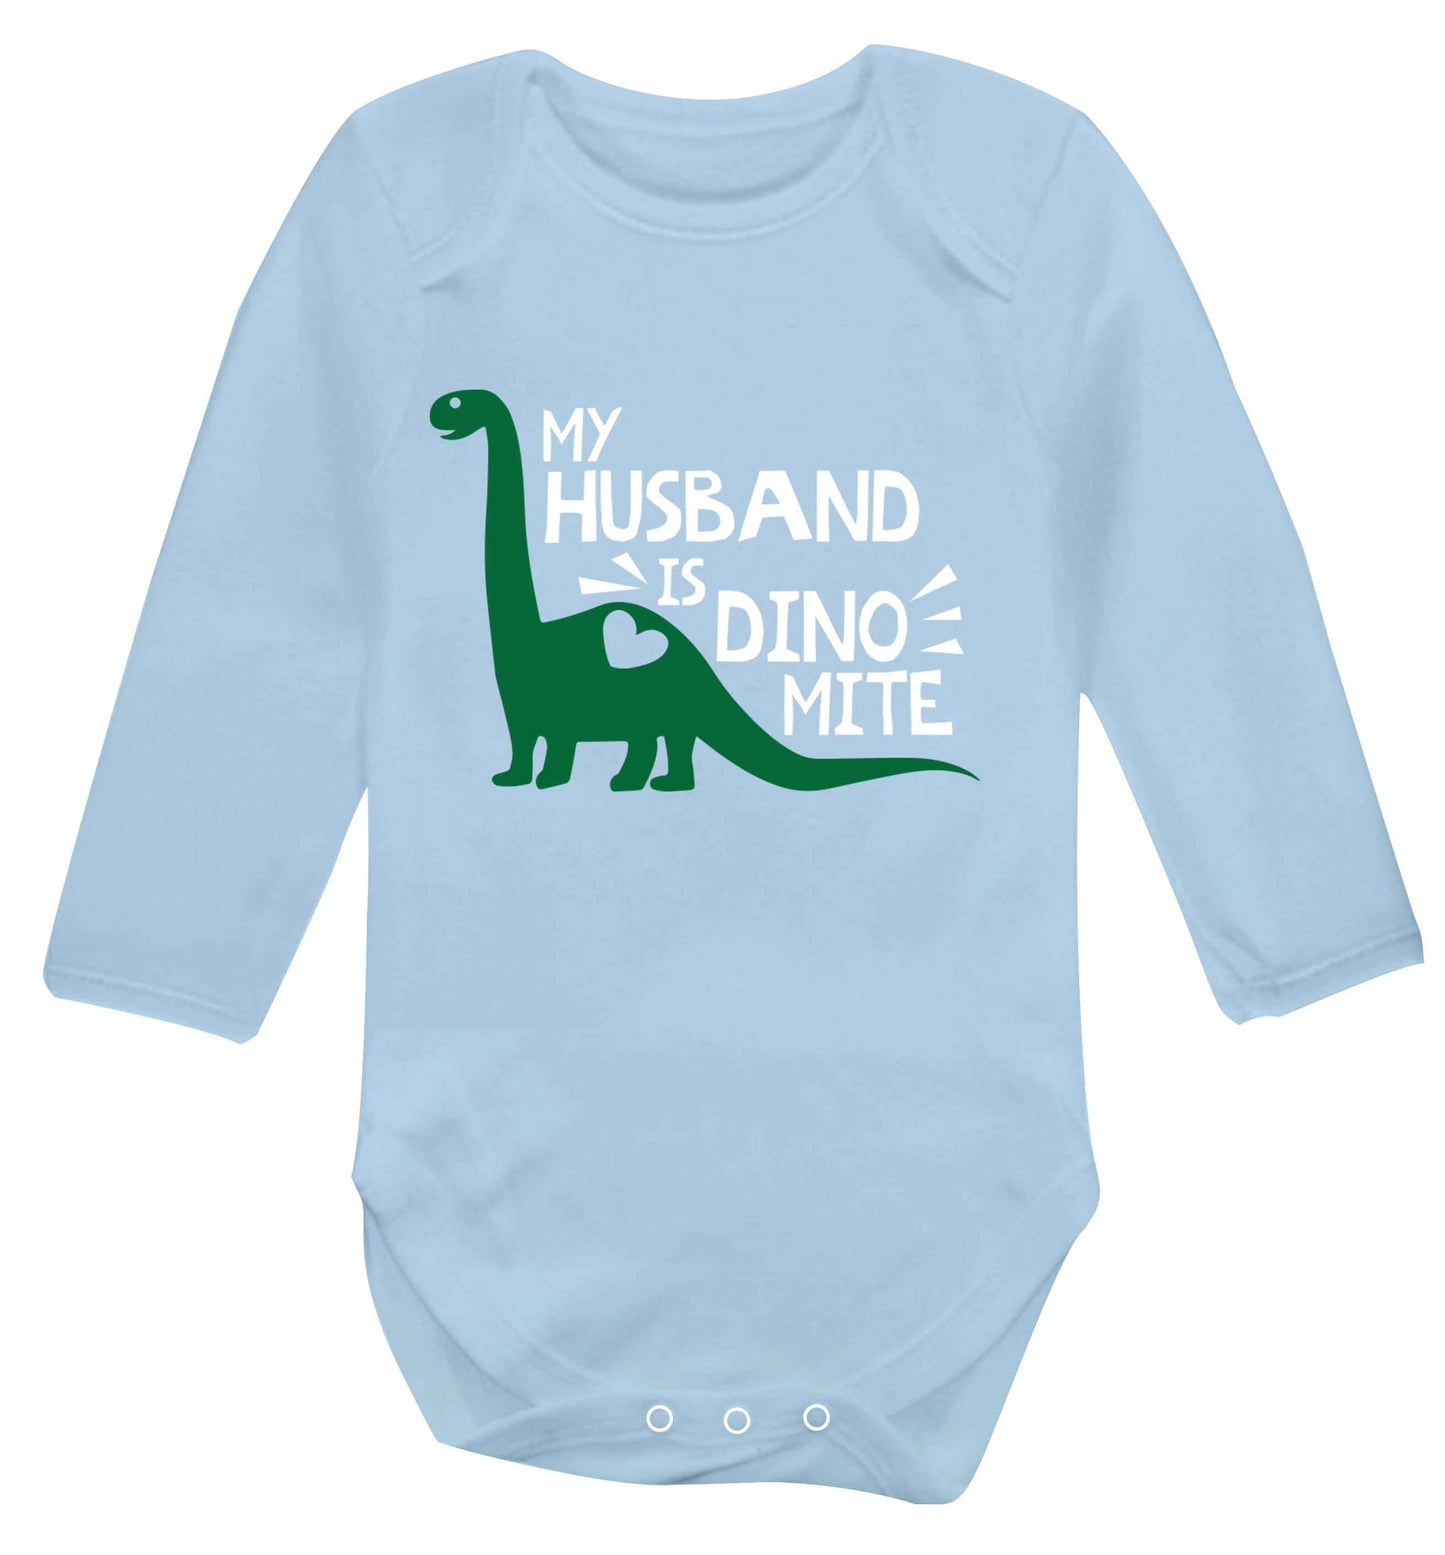 My husband is dinomite! Baby Vest long sleeved pale blue 6-12 months